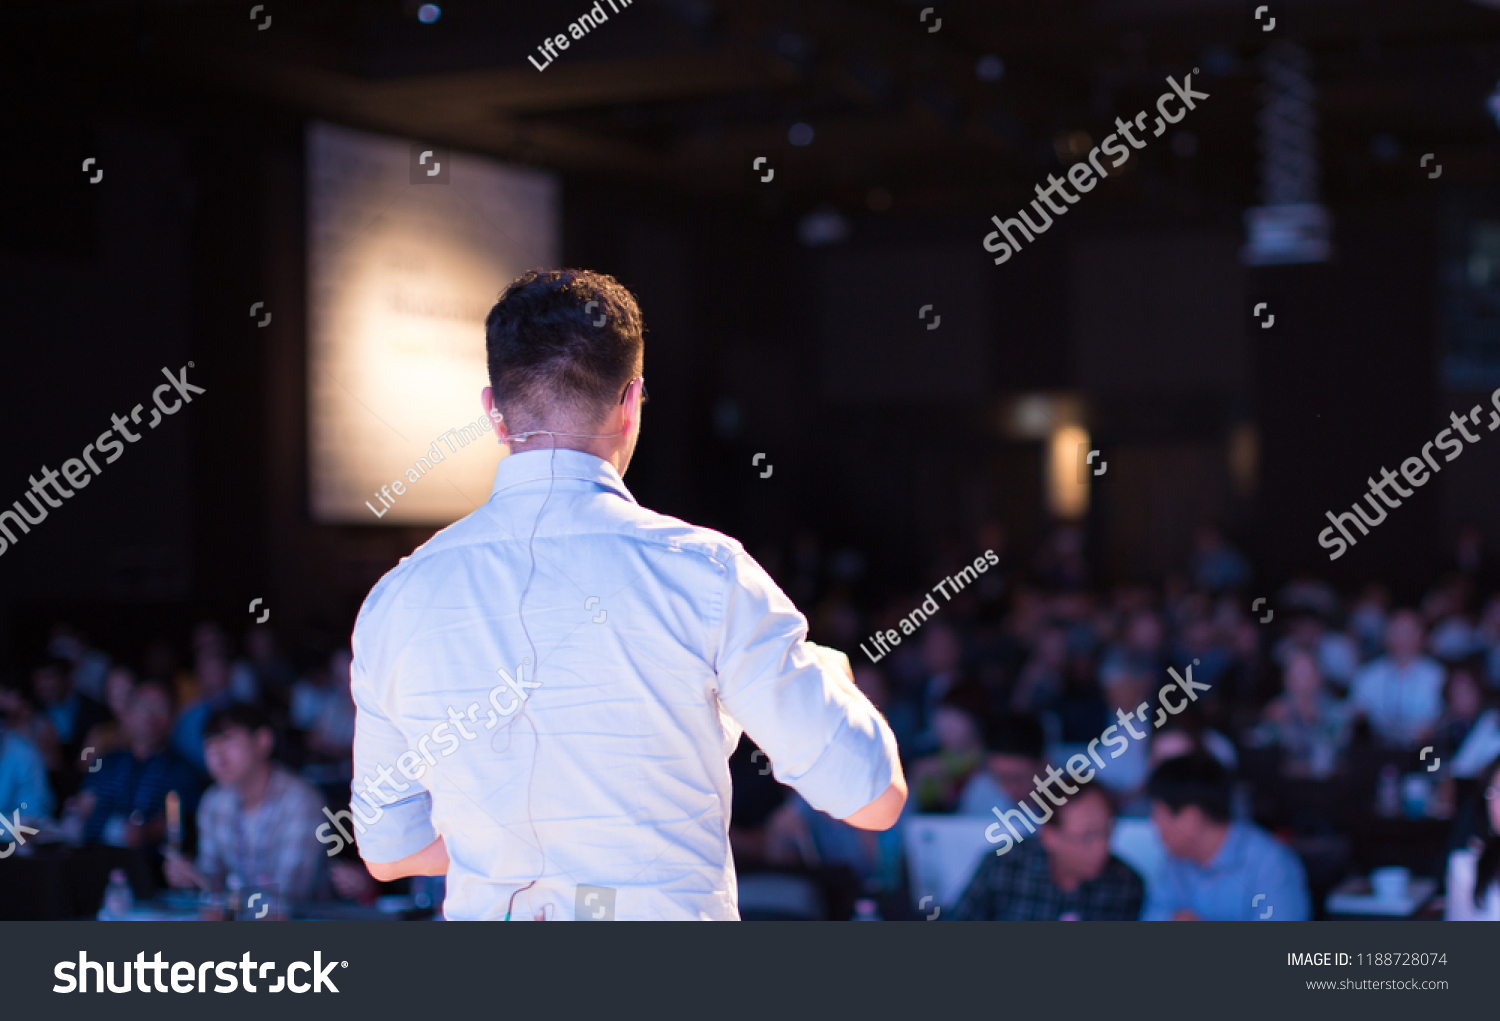 Presenter Presenting Presentation to Audience. Defocused Blurred Conference Meeting People. Lecturer on Stage. Speaker Giving Speech to Business and Technology Industry People. #1188728074